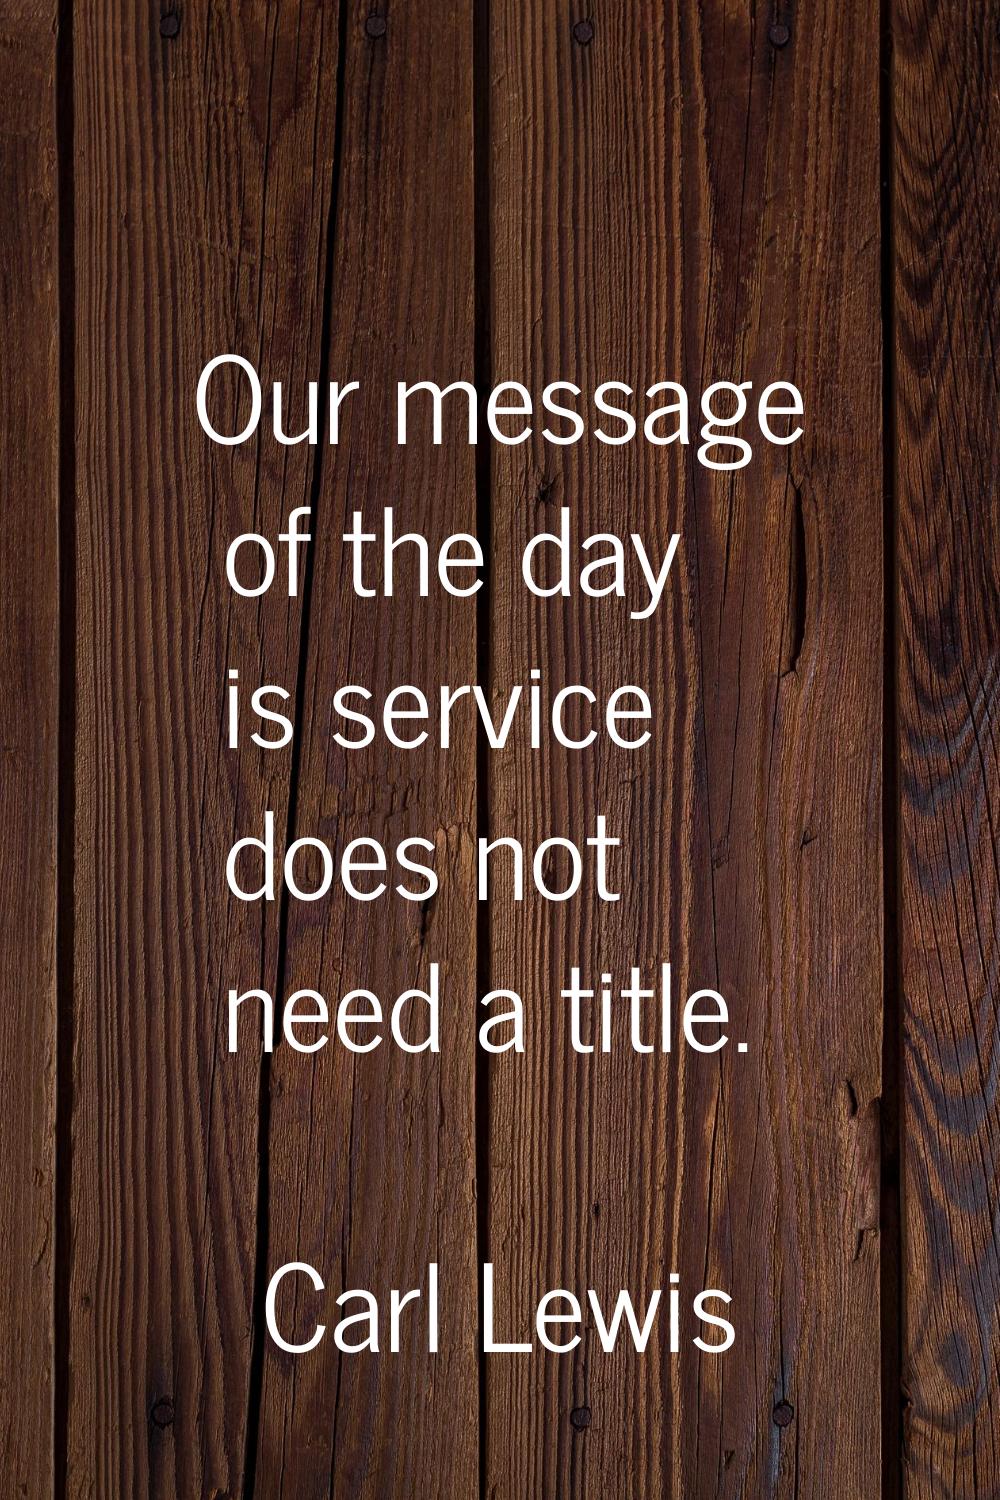 Our message of the day is service does not need a title.